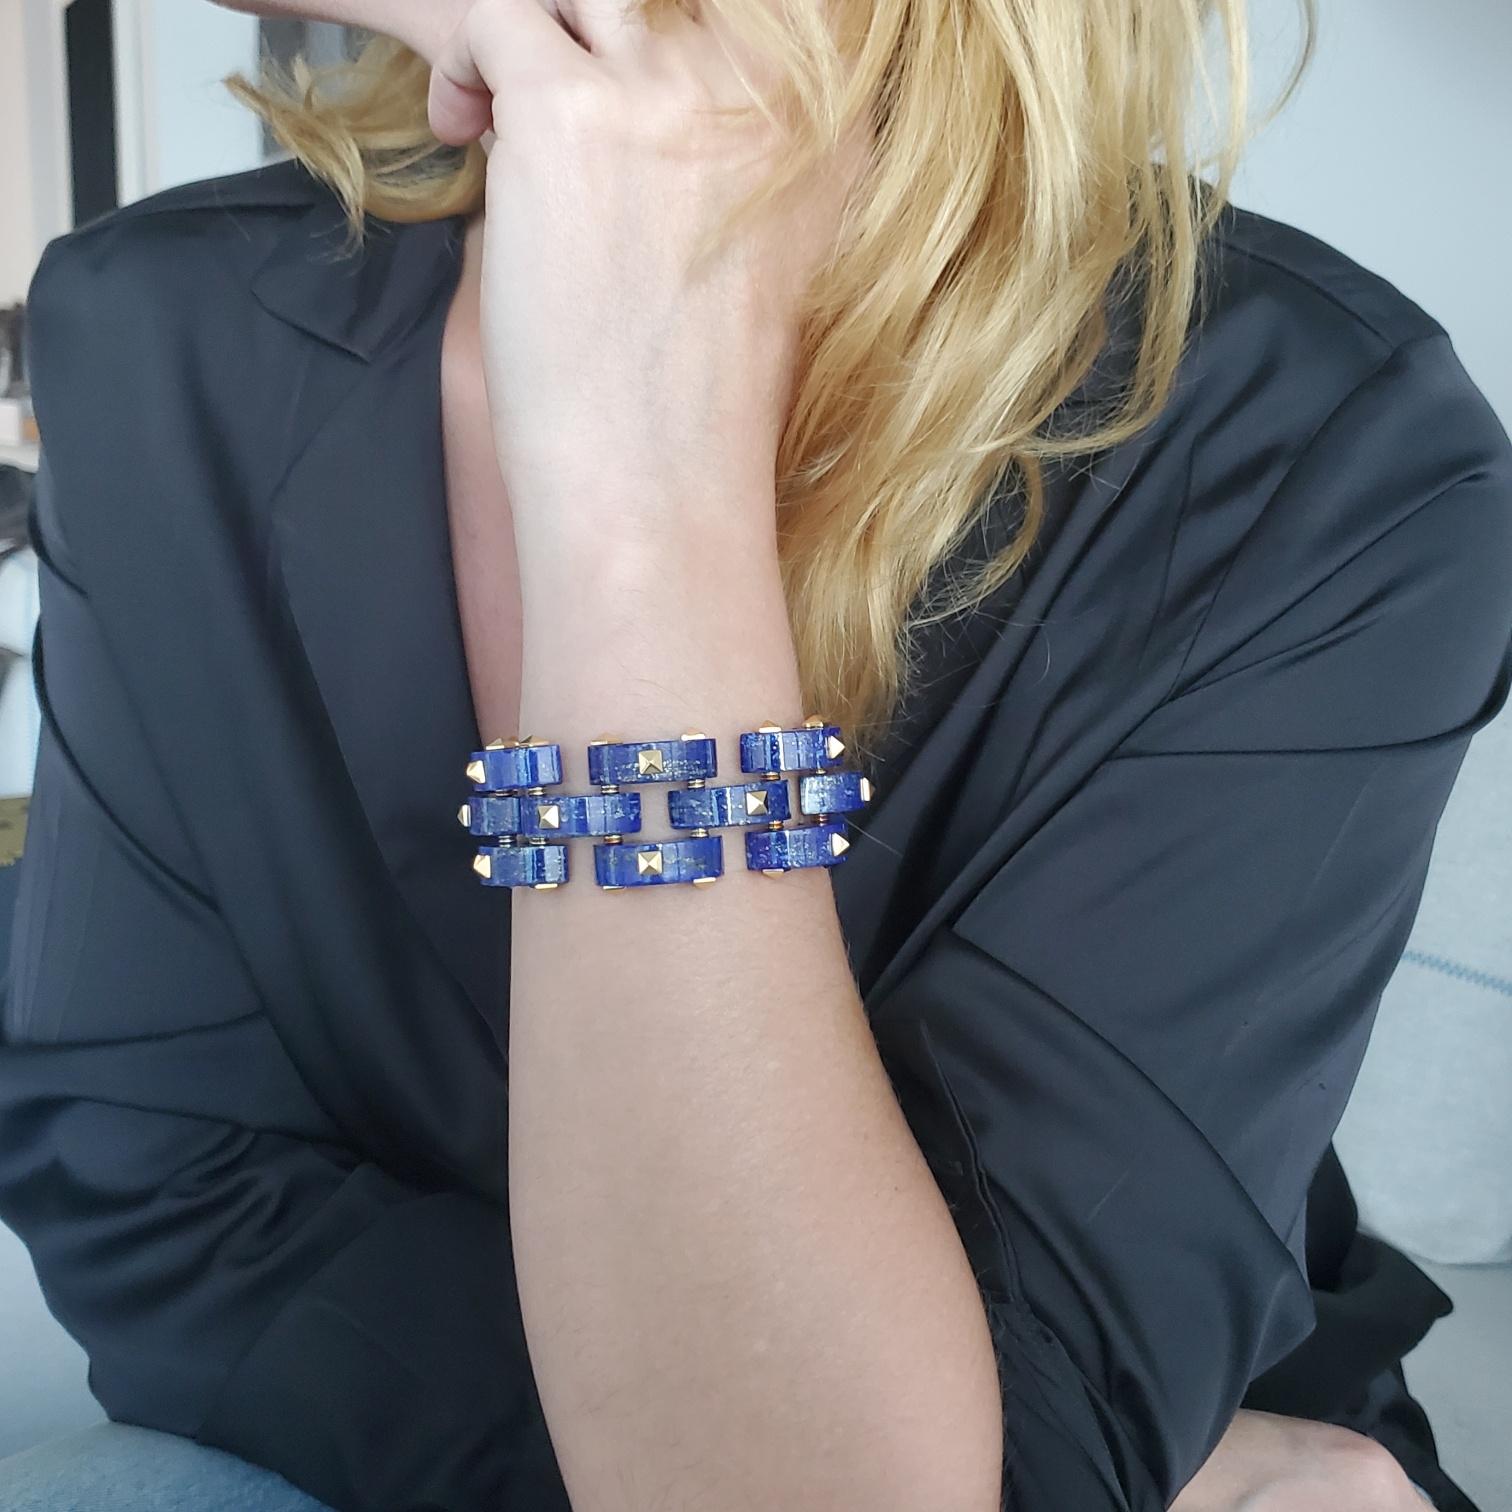 Geometric bracelet designed by the Aletto Brothers.

A contemporary masterpiece of geometric design. This fabulous flexible links bracelet was created by the jewelry designers Aletto Brothers and are part of the new Lapis collection. It was